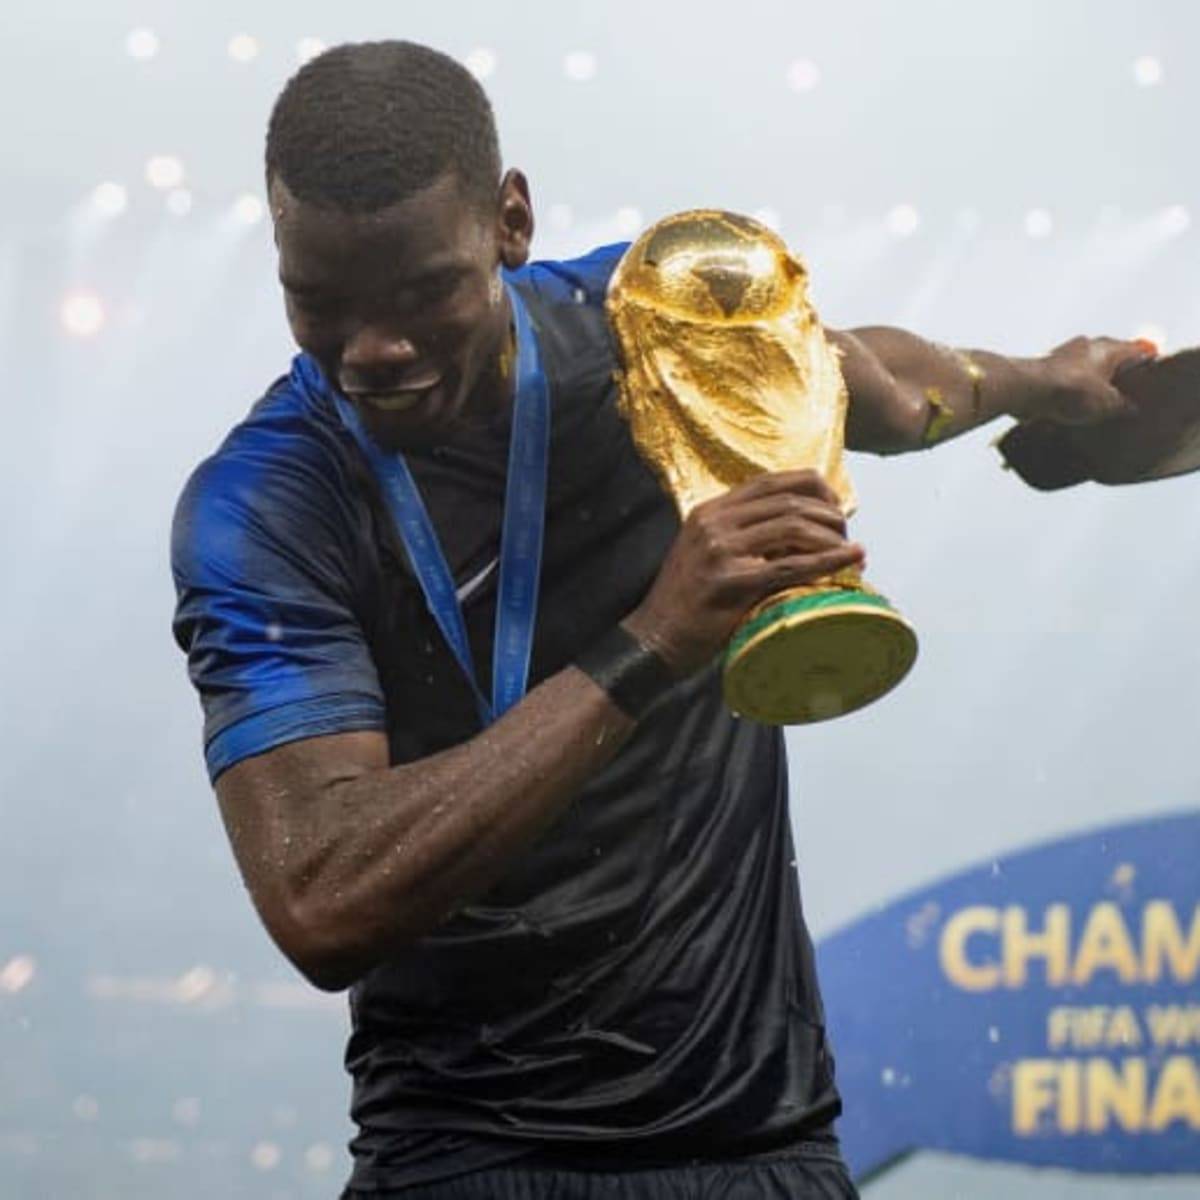 Paul Pogba is only the fourth UTD men's player in club history to win the World Cup